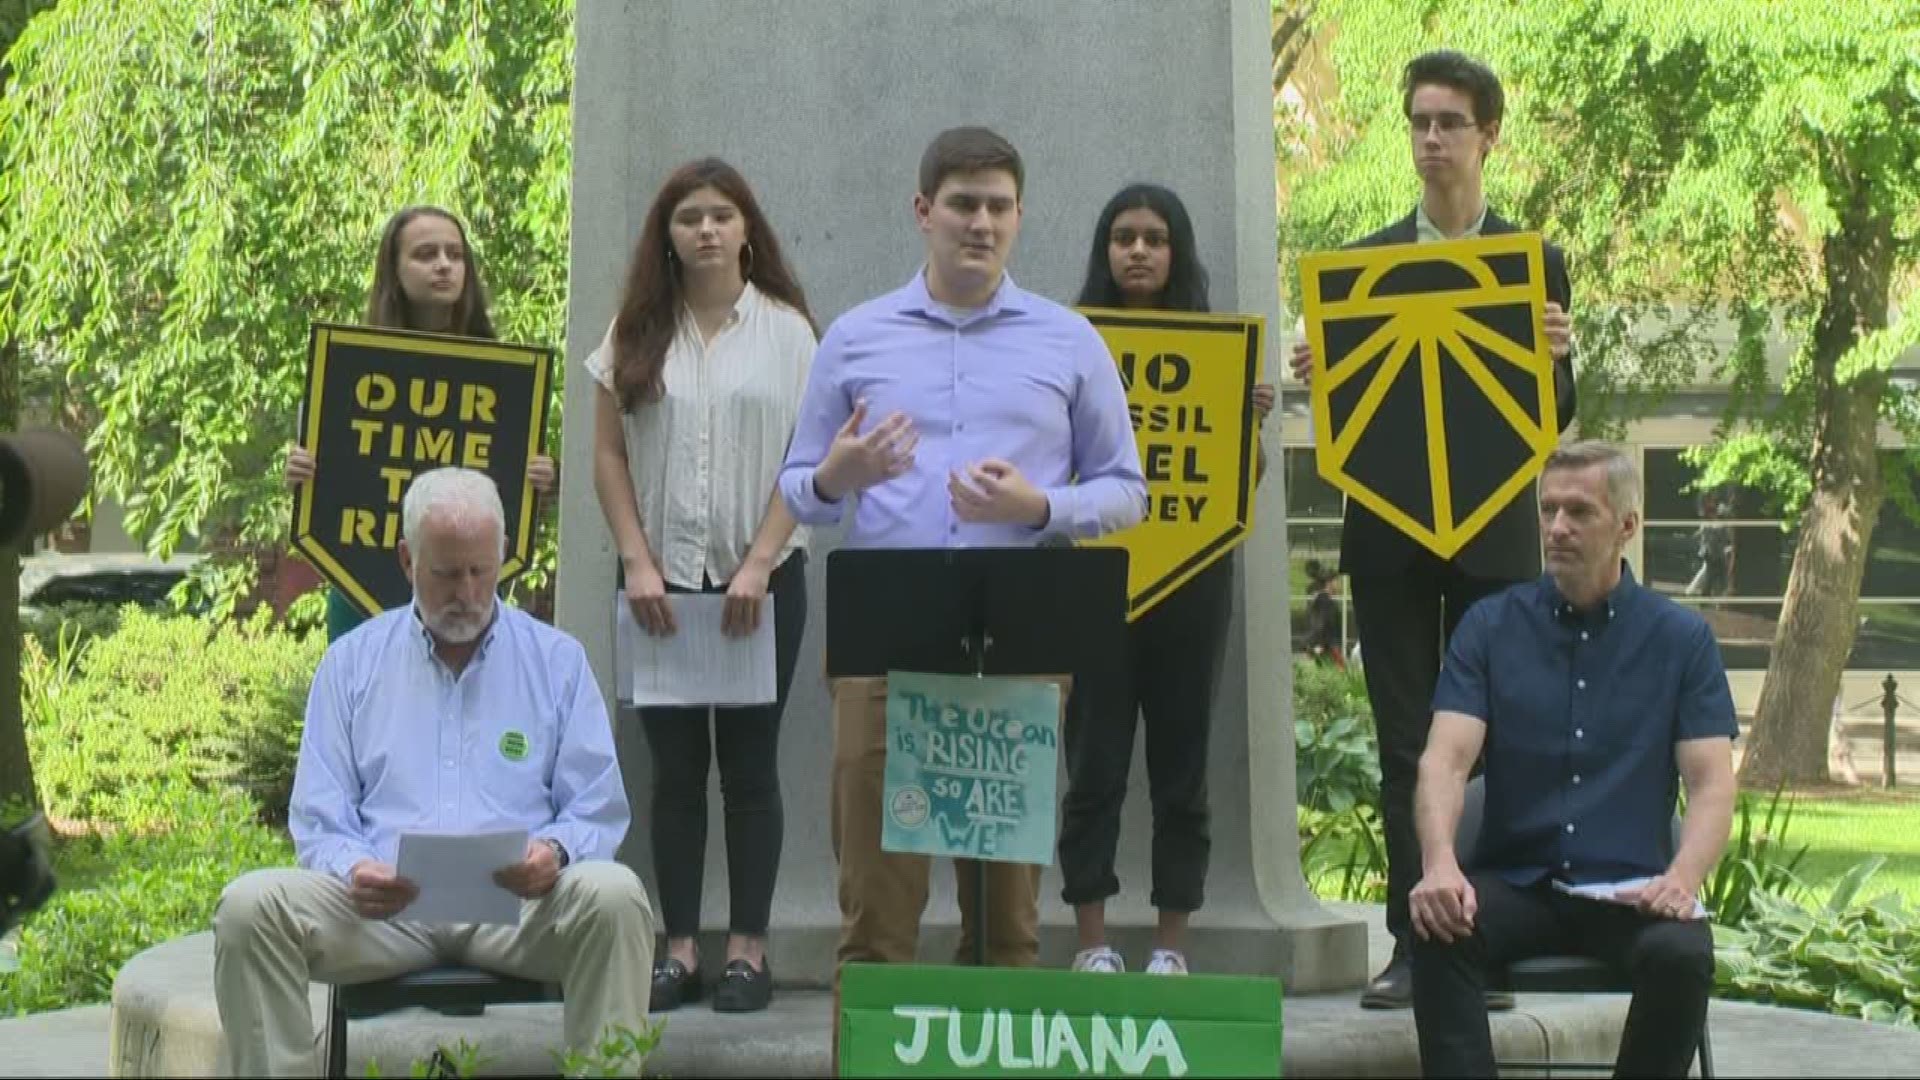 A climate change lawsuit brought by Oregon students will have a pivotal hearing this week.